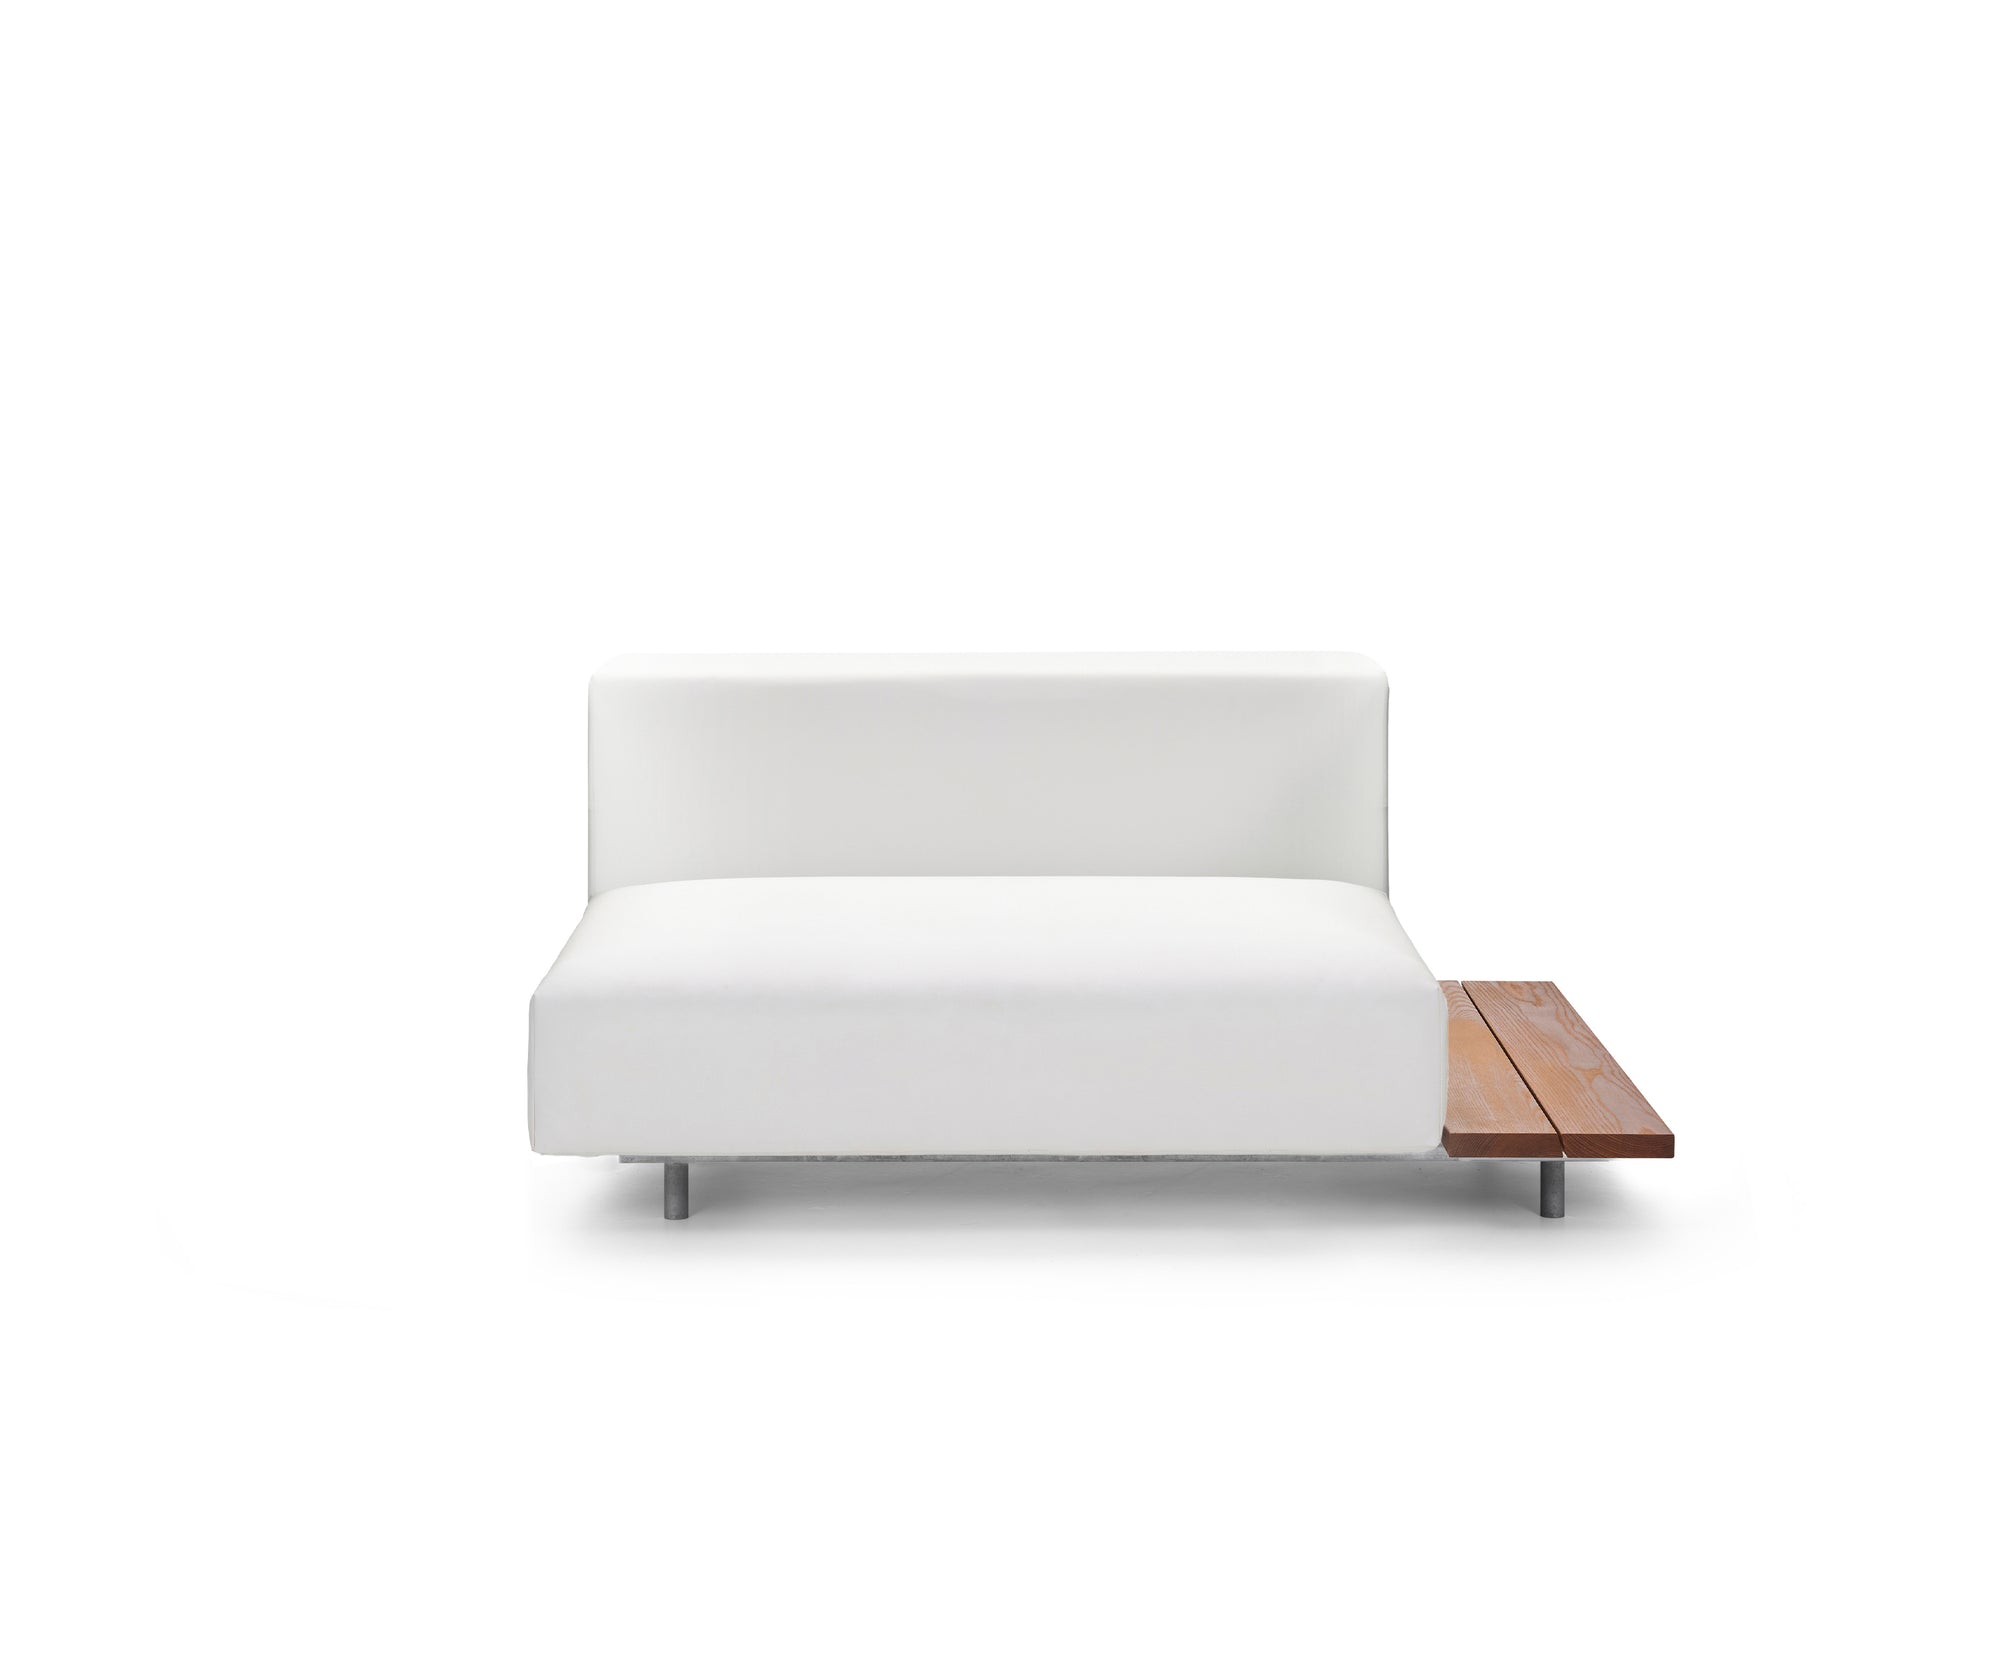 Walrus Seat With Side Table